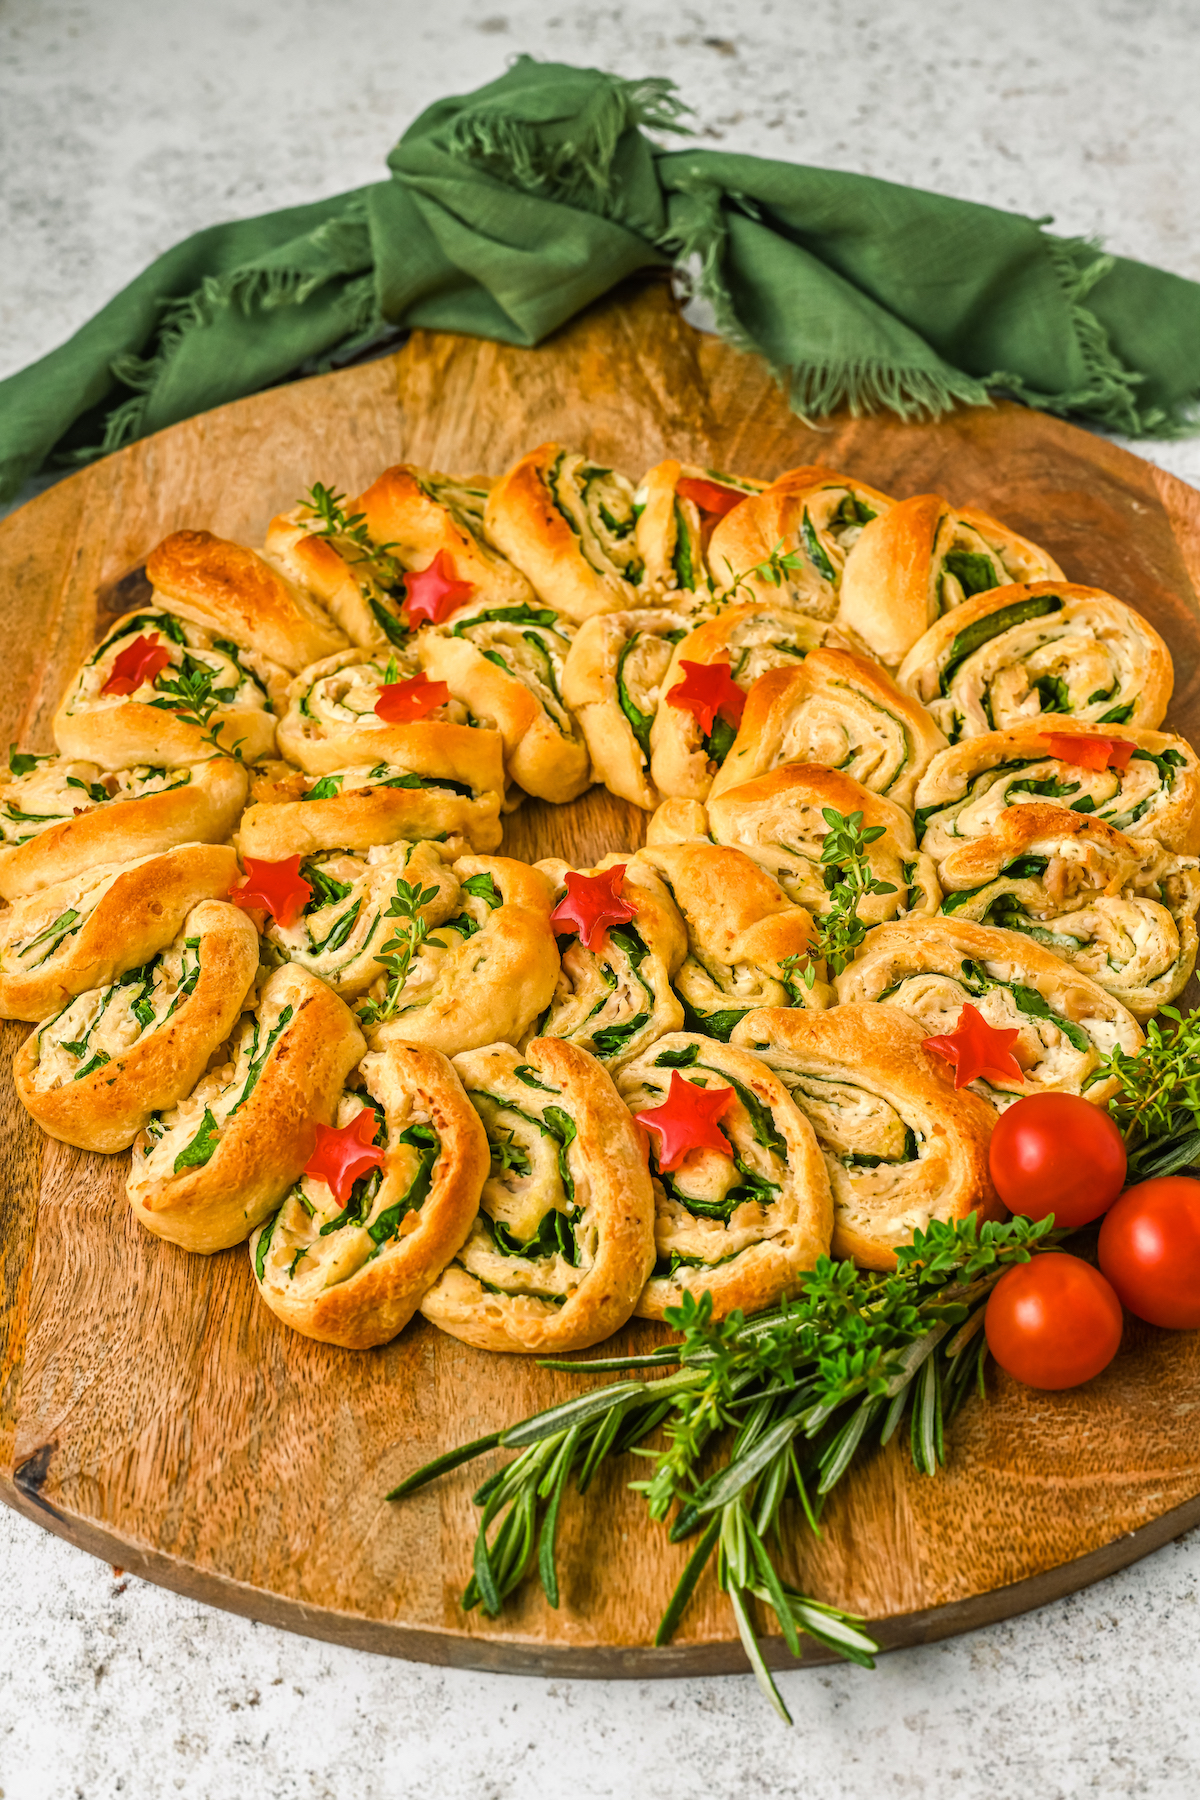 A holiday appetizer made of crescent dough and fillings, shaped like a wreath.